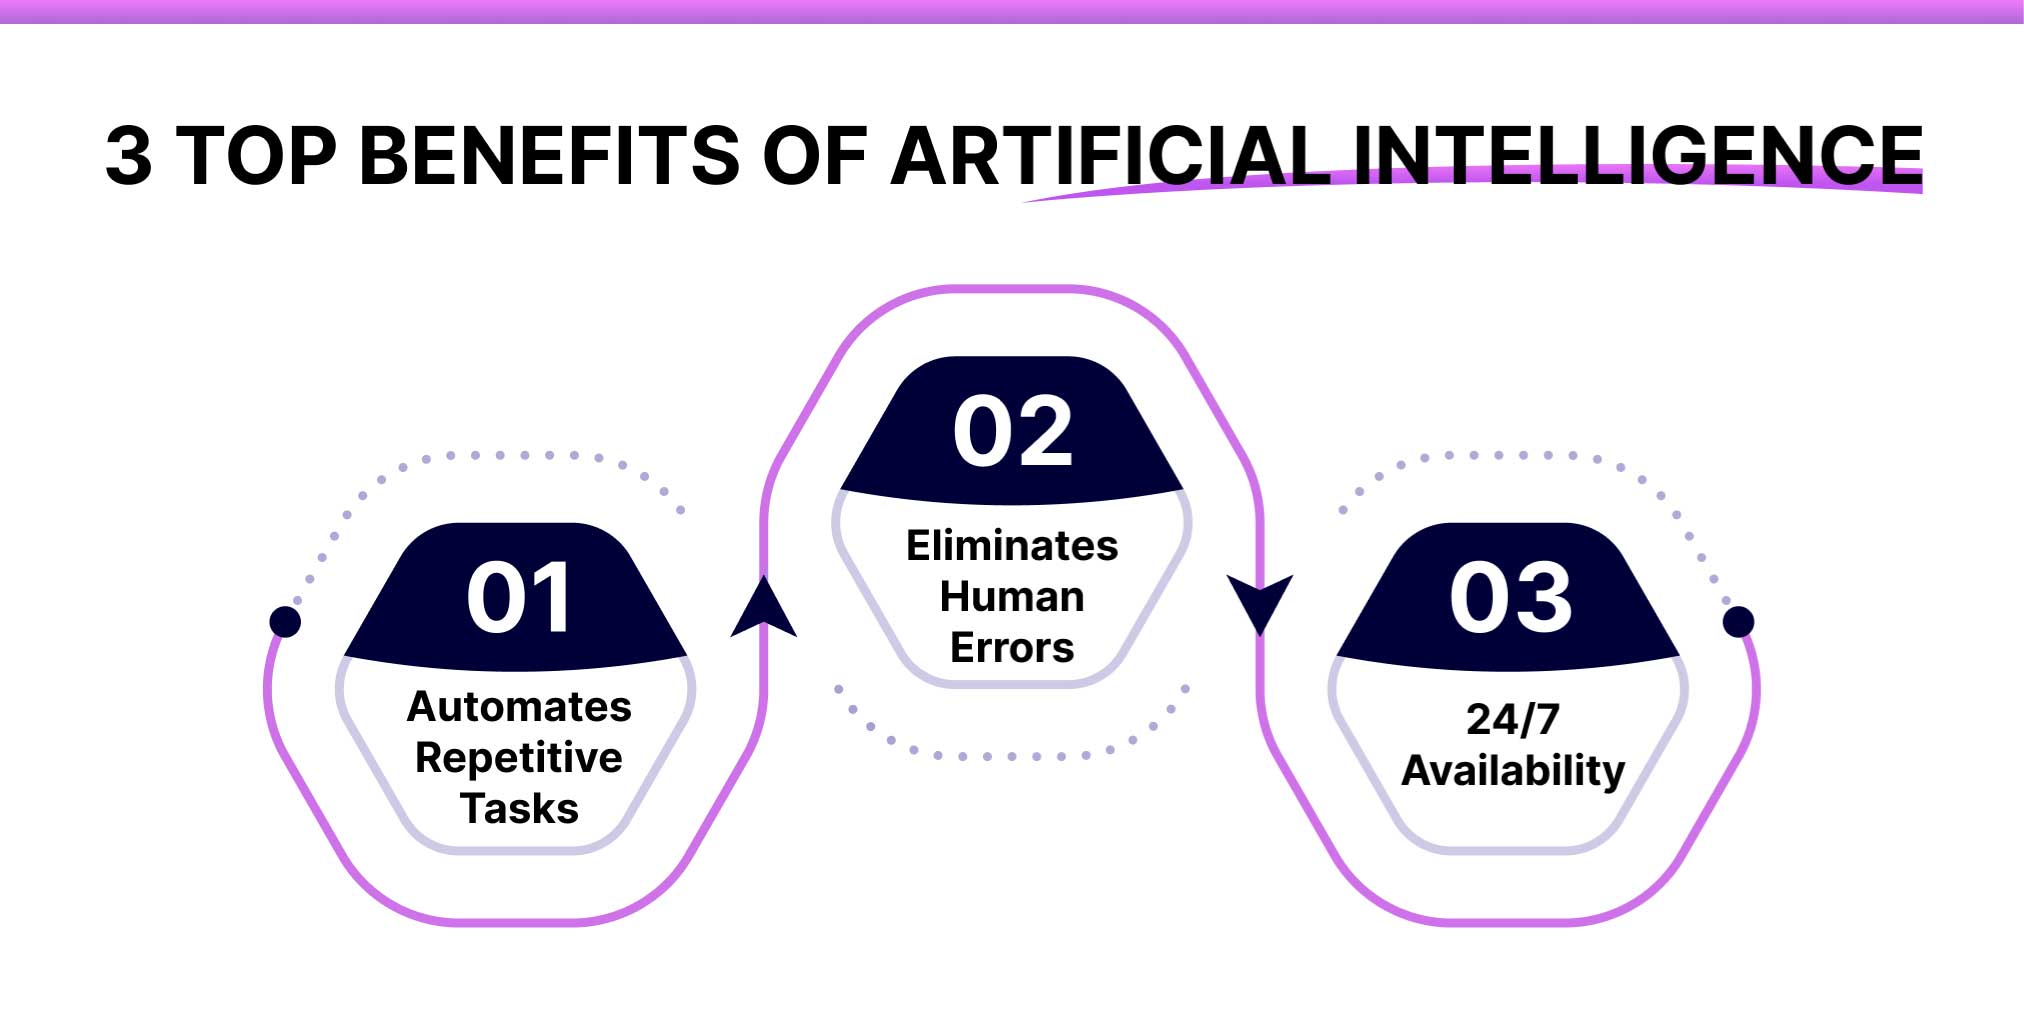 3 Top Benefits of AI